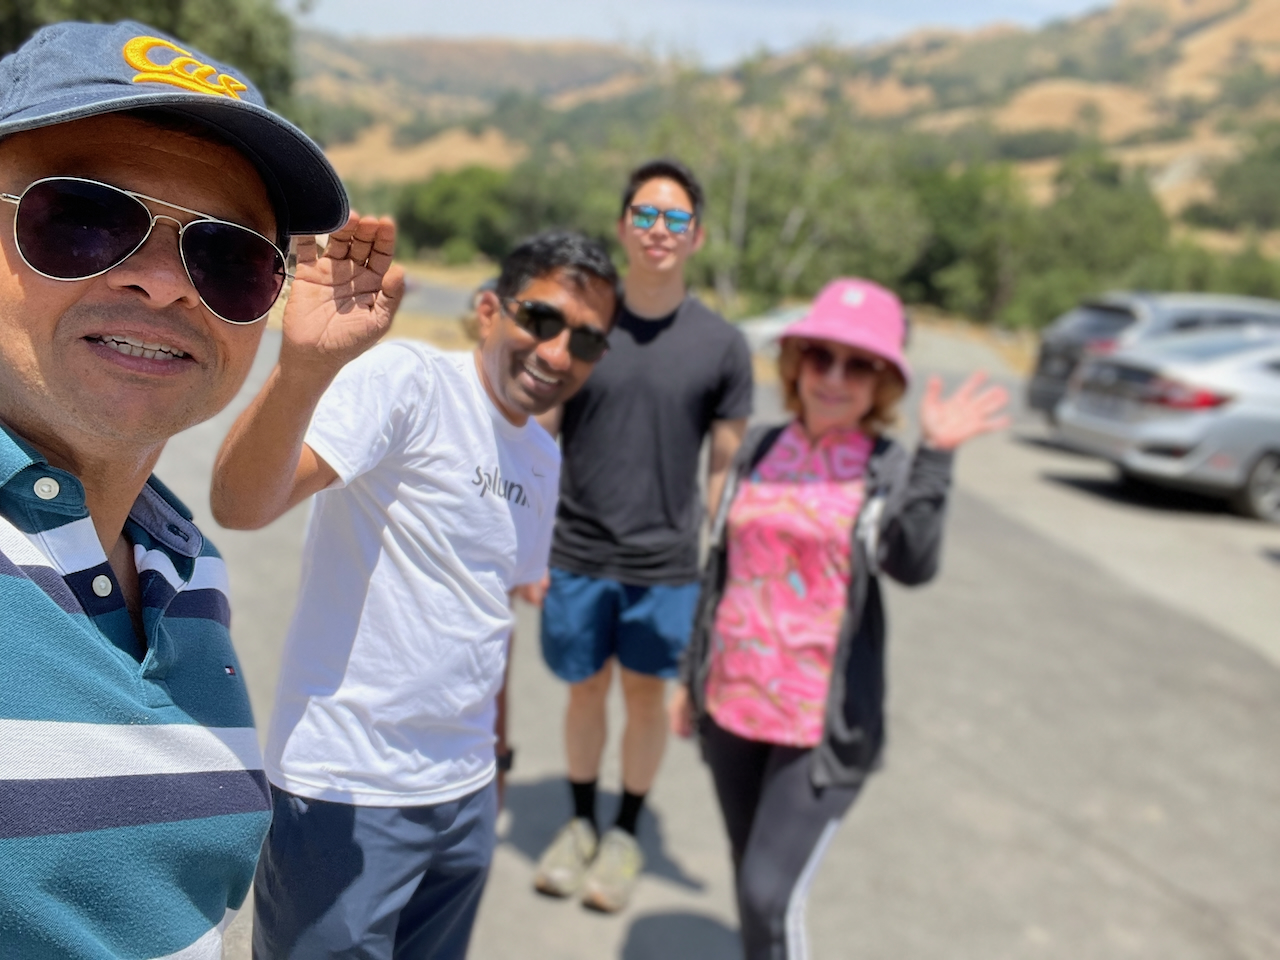 Hiking with colleagues, Sunol Regional Park, CA